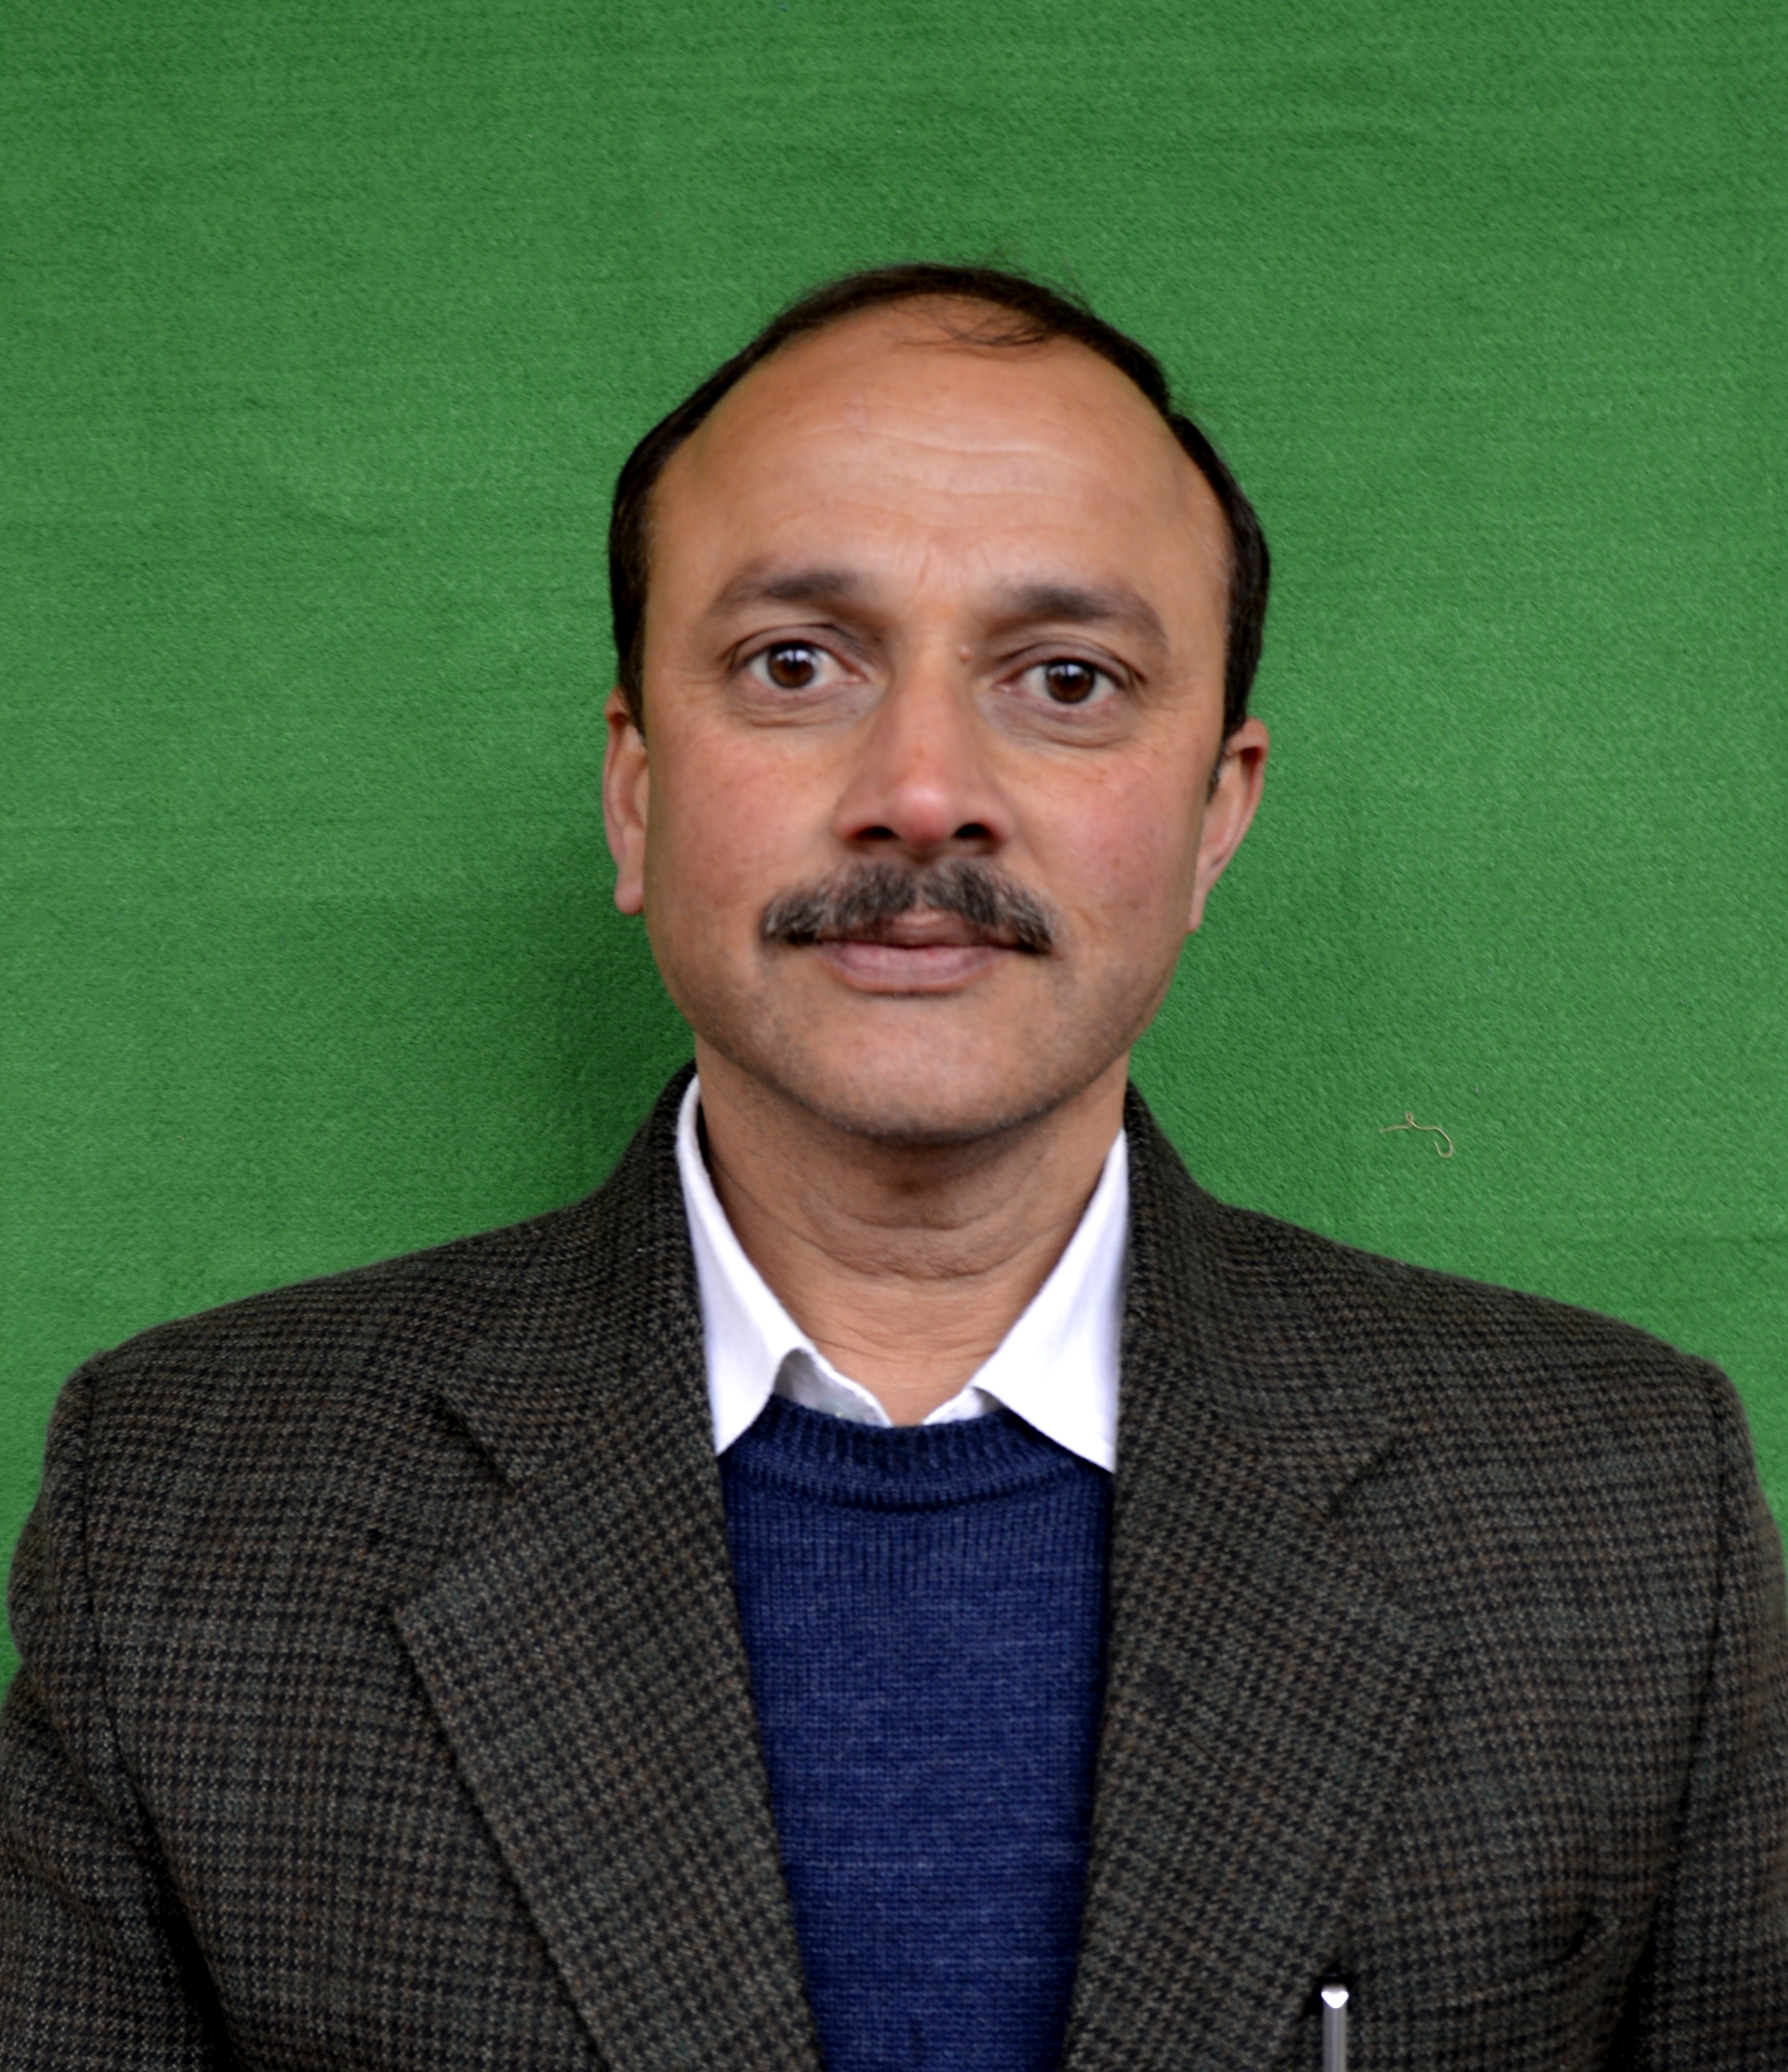 central university of himachal pradesh, hpcu, cuhp, dharamshala, dehra, Officer on School of Commerce and Management Studies (SCMS) Dr. B Singh